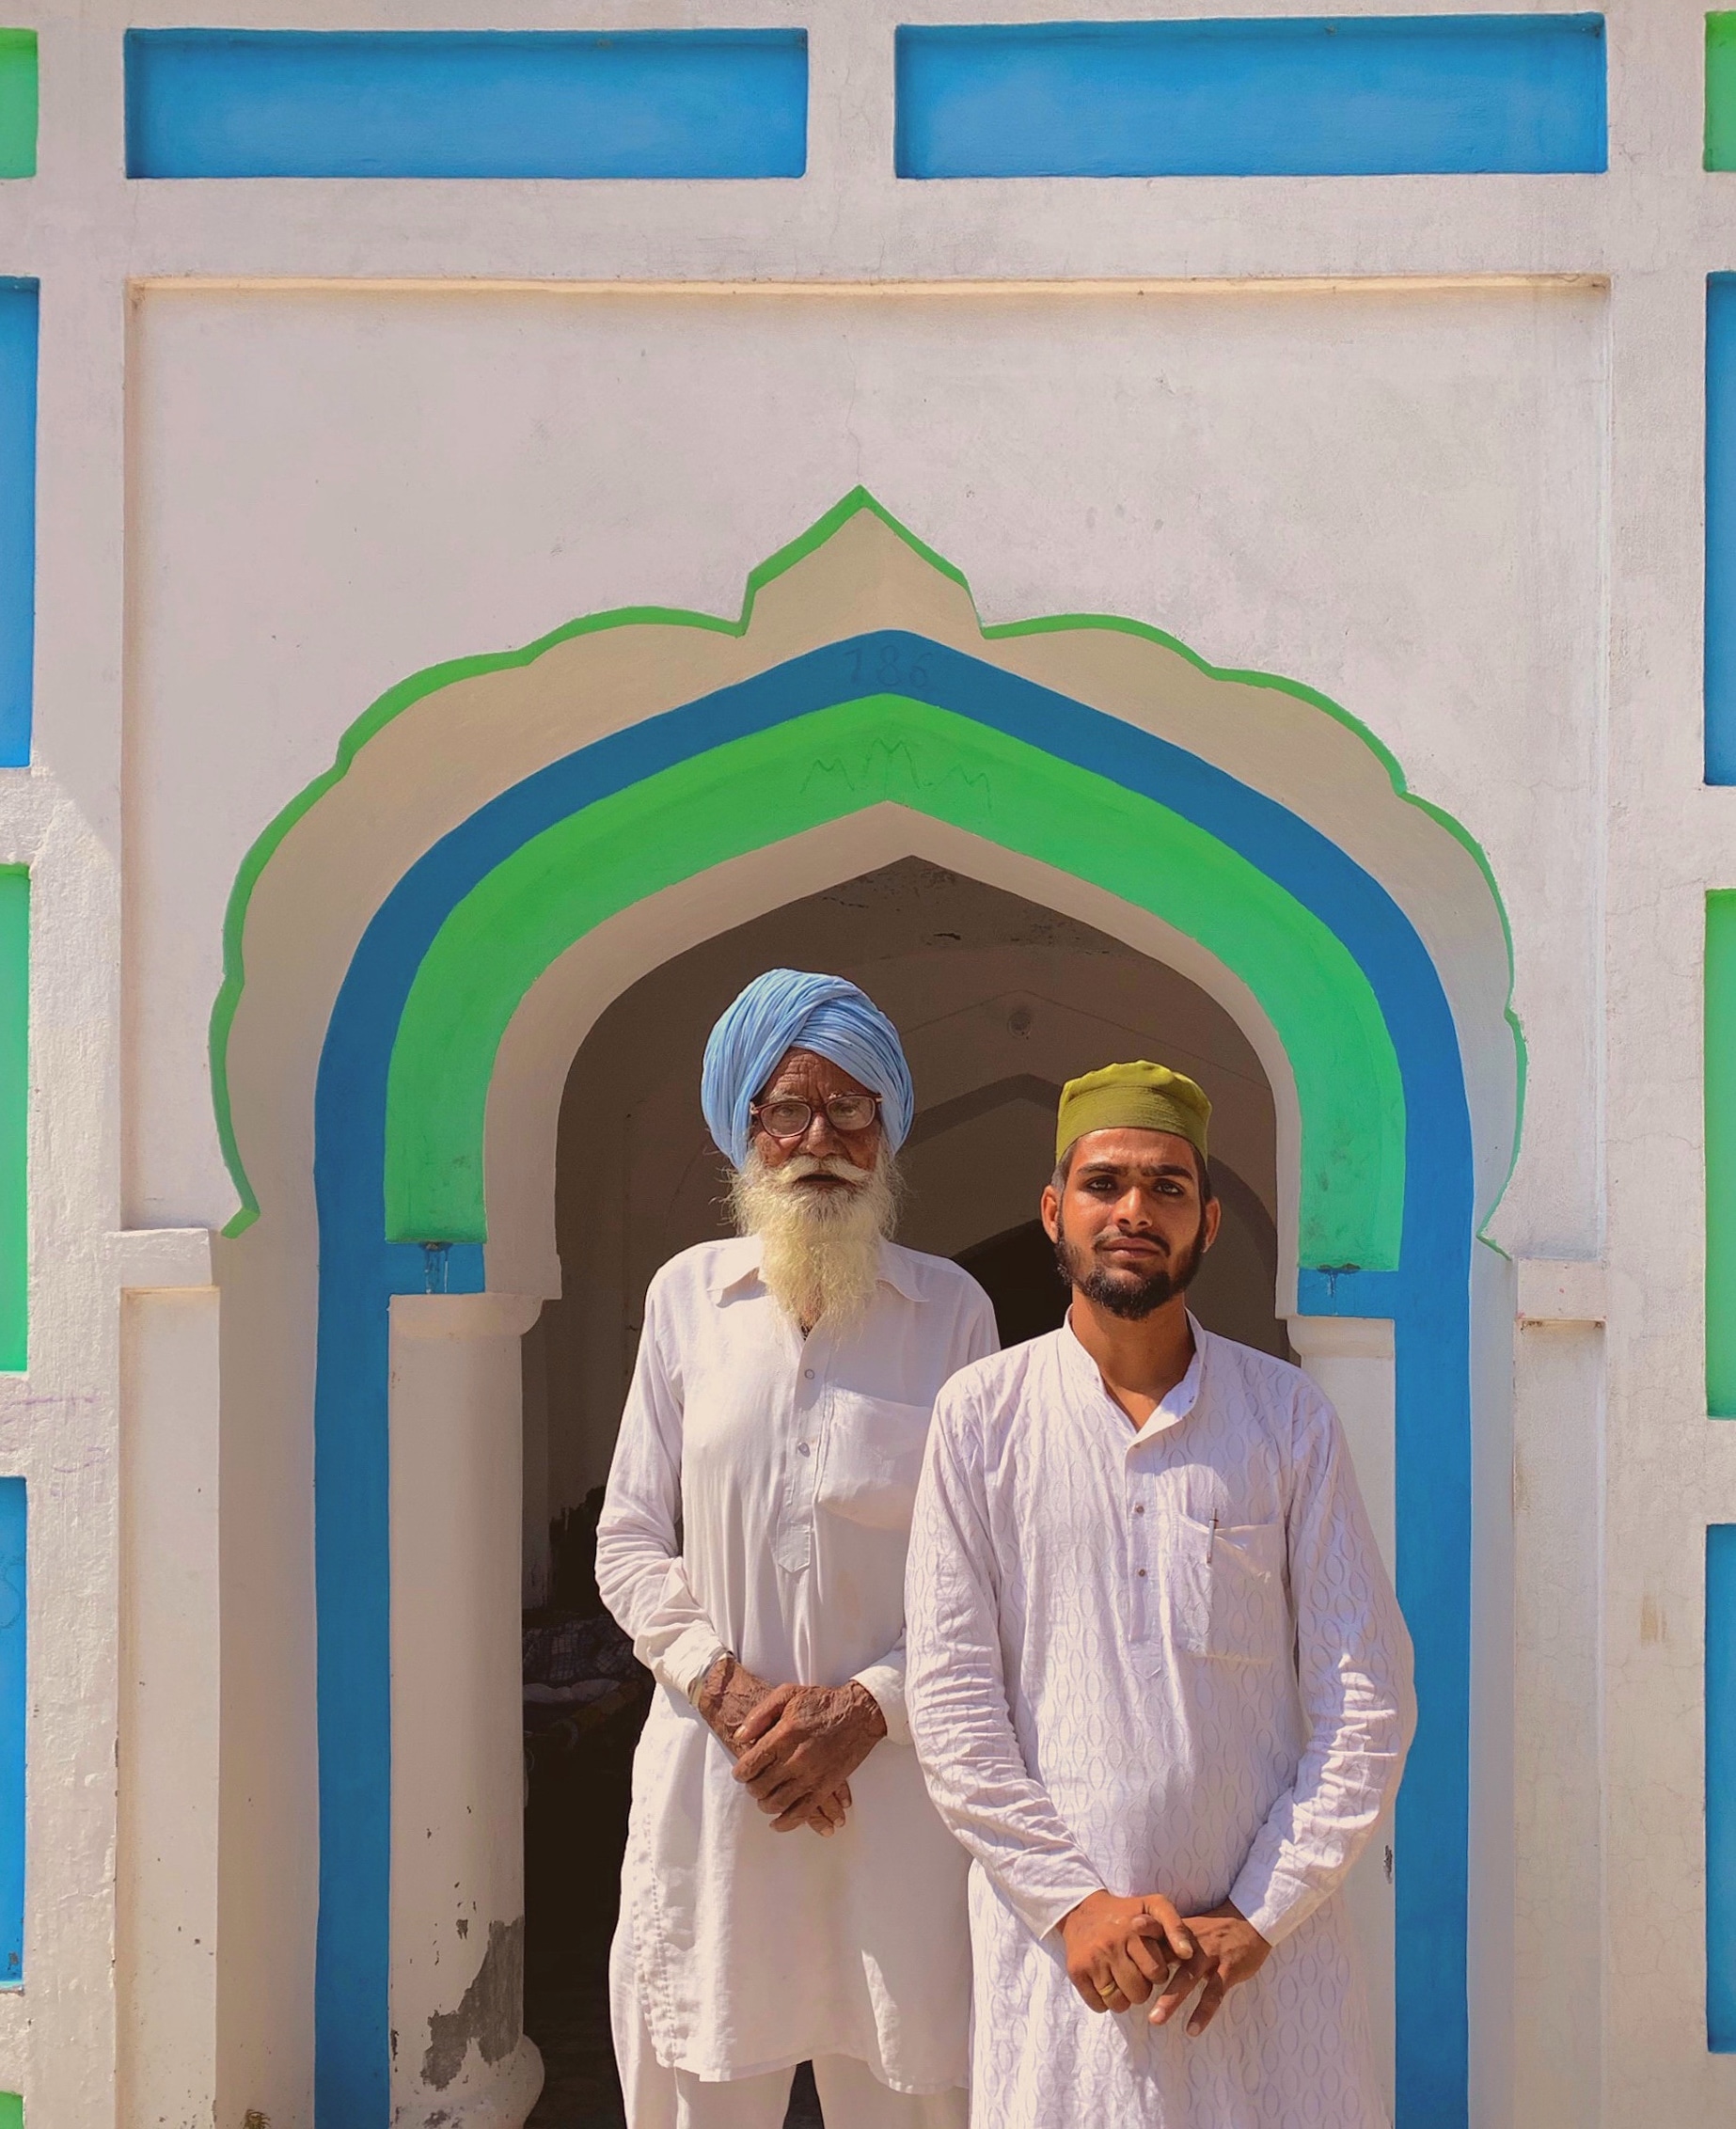 Two months ago I travelled to Punjab, to reconnect Bahadur with his childhood village. Most towns were devoid of Muslims, yet in Kasbah Bhural, different religions still prayed side by side